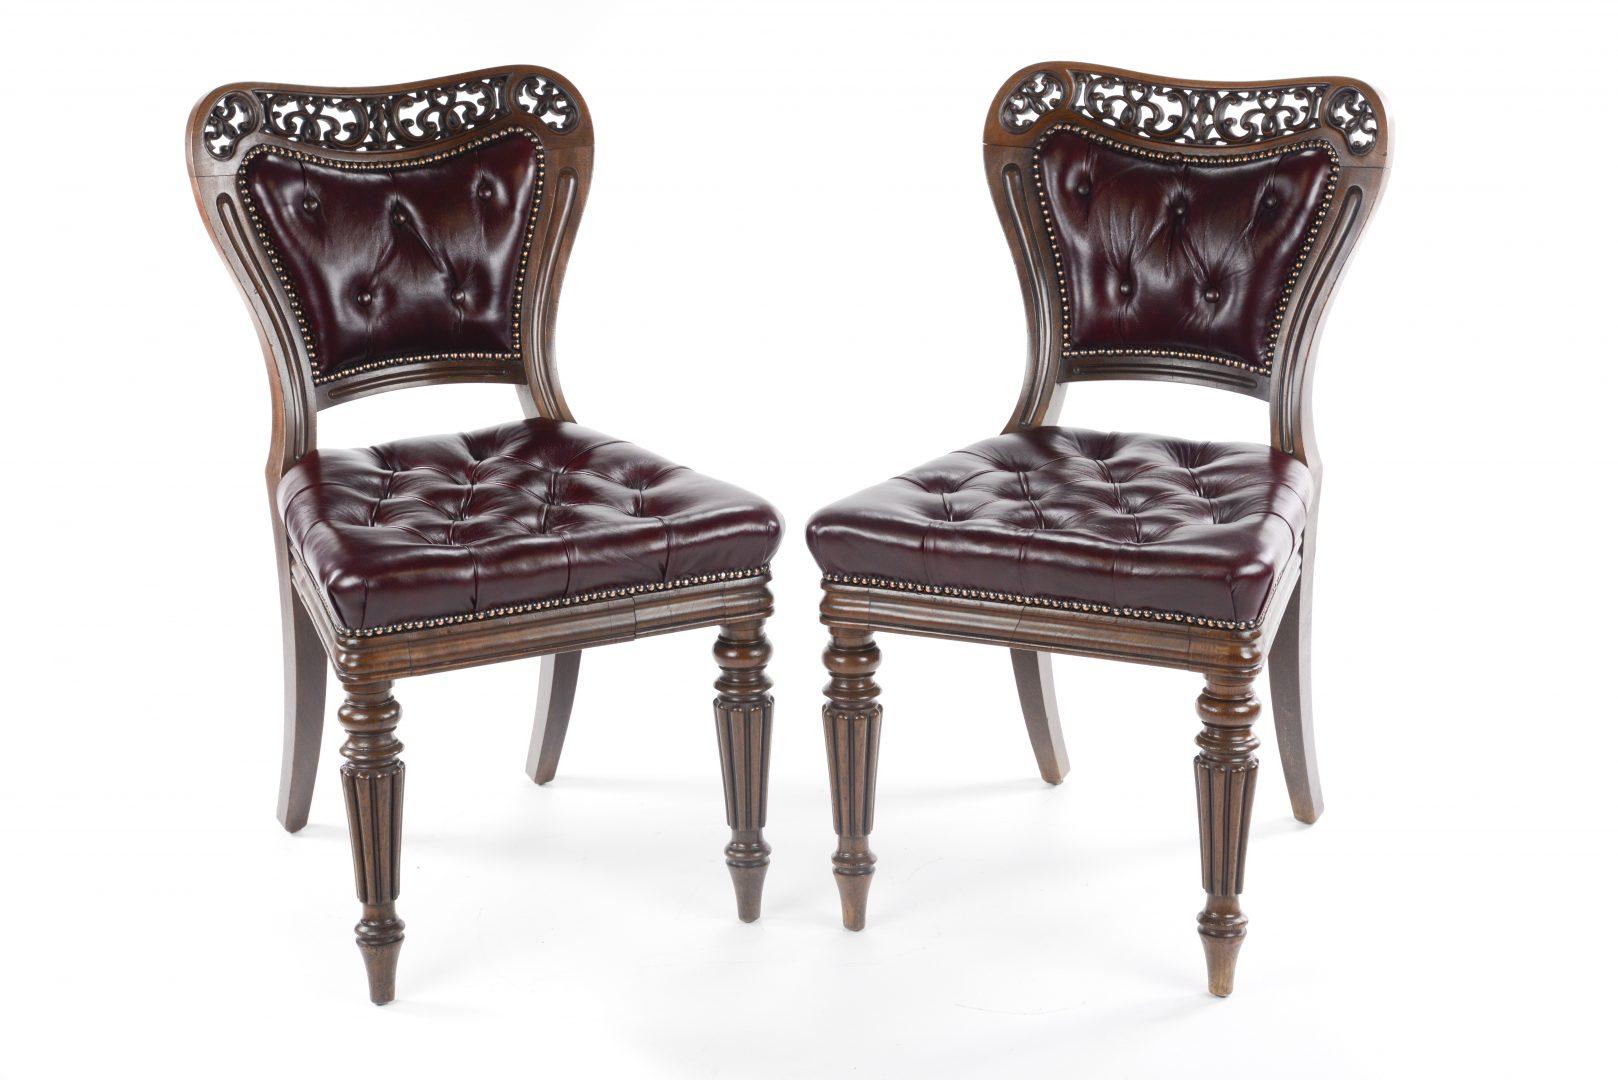 Mahogany Pair of Very Fine George IV Library Chairs, Firmly Attributed to Gillows